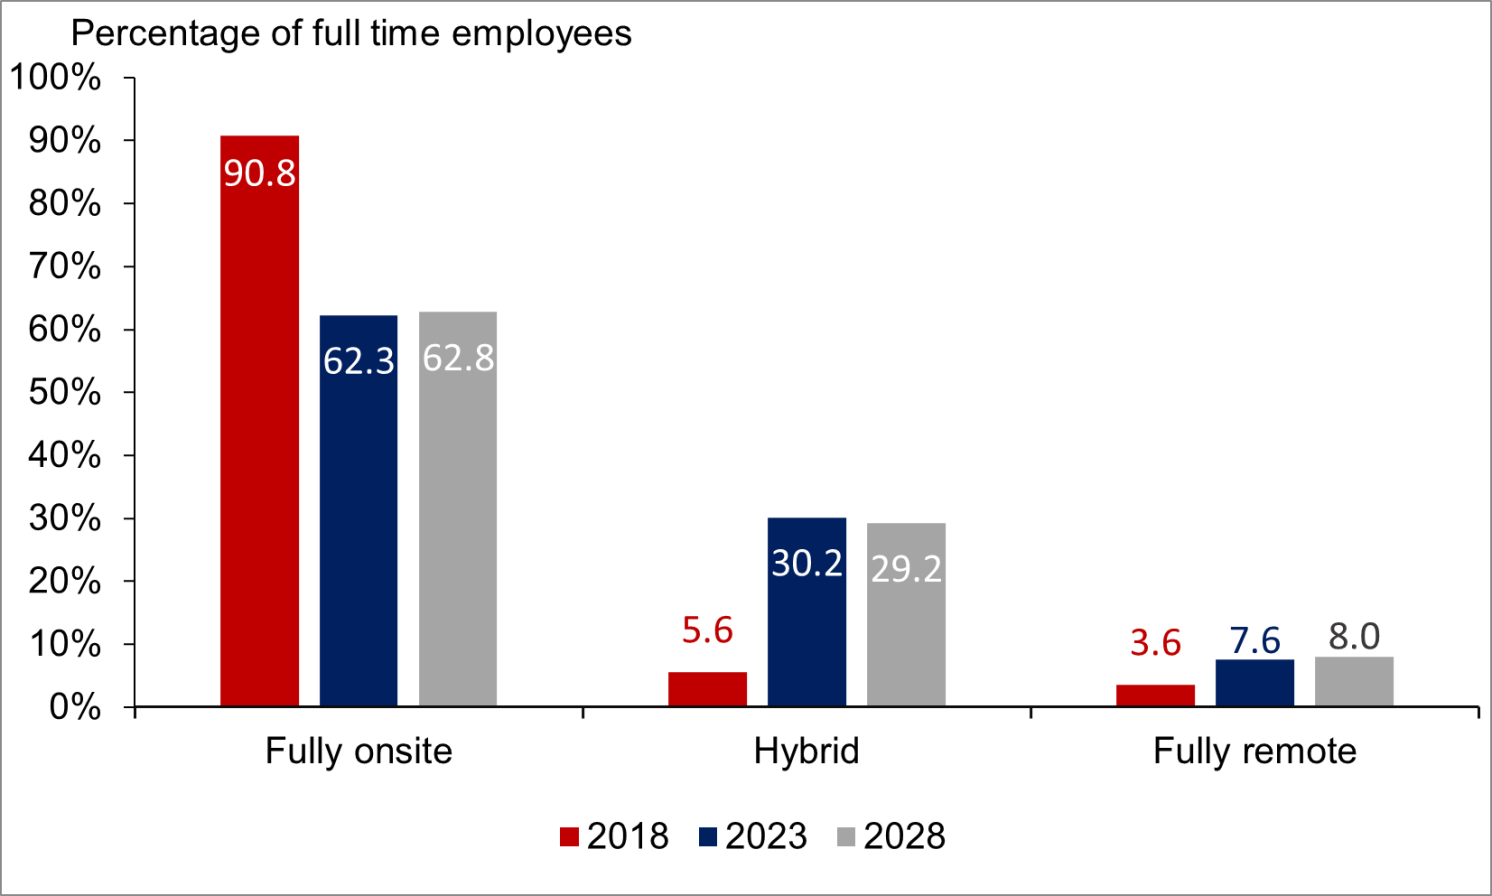 Figure 1 Proportion of full-time employees based fully onsite, hybrid or fully remote in 2018, 2023 and expected in 2028